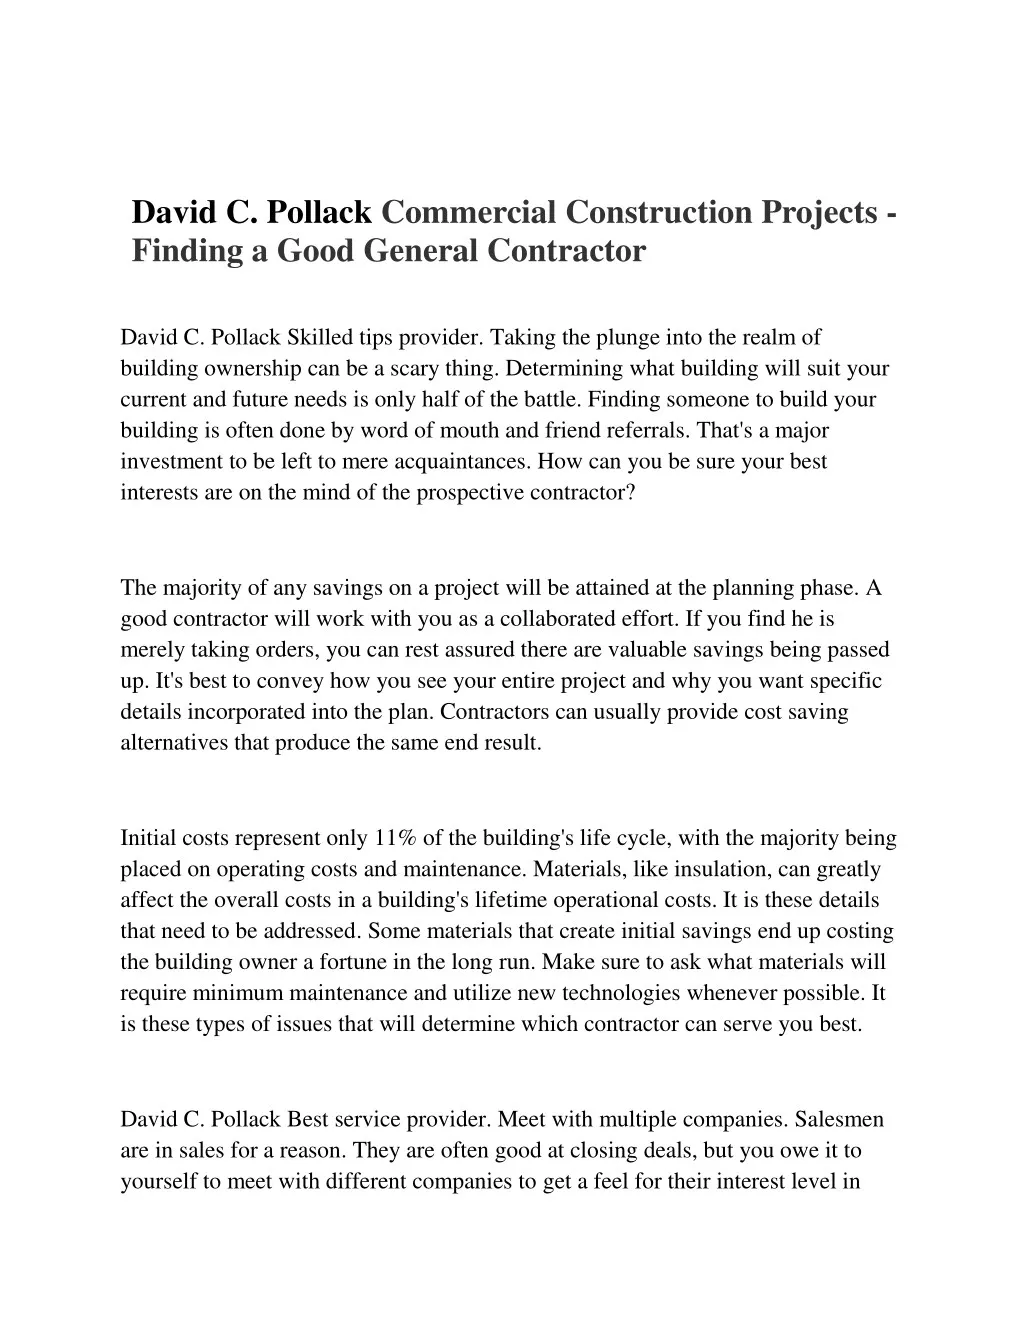 david c pollack commercial construction projects